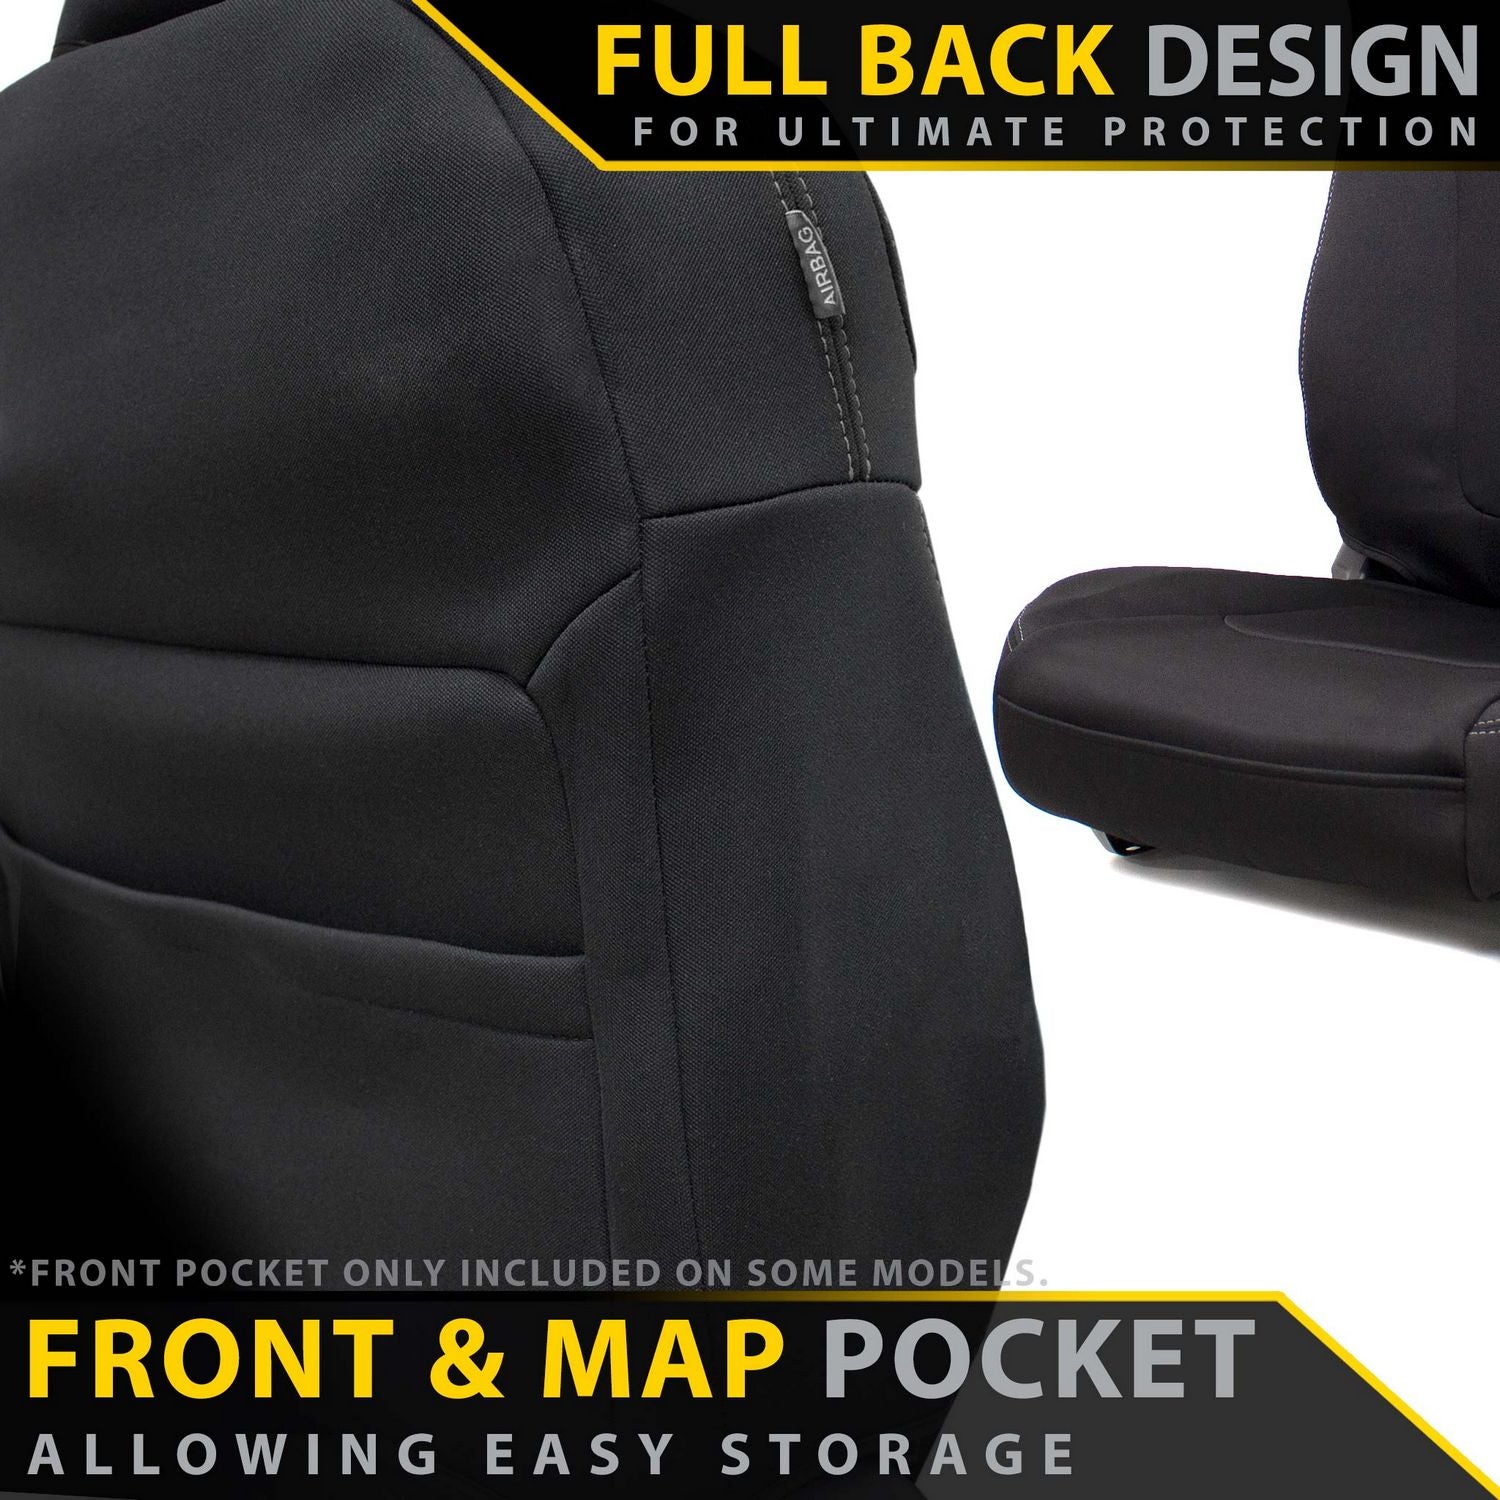 Isuzu D-MAX RG Single Cab Neoprene 2x Front Seat Covers (Made to Order)